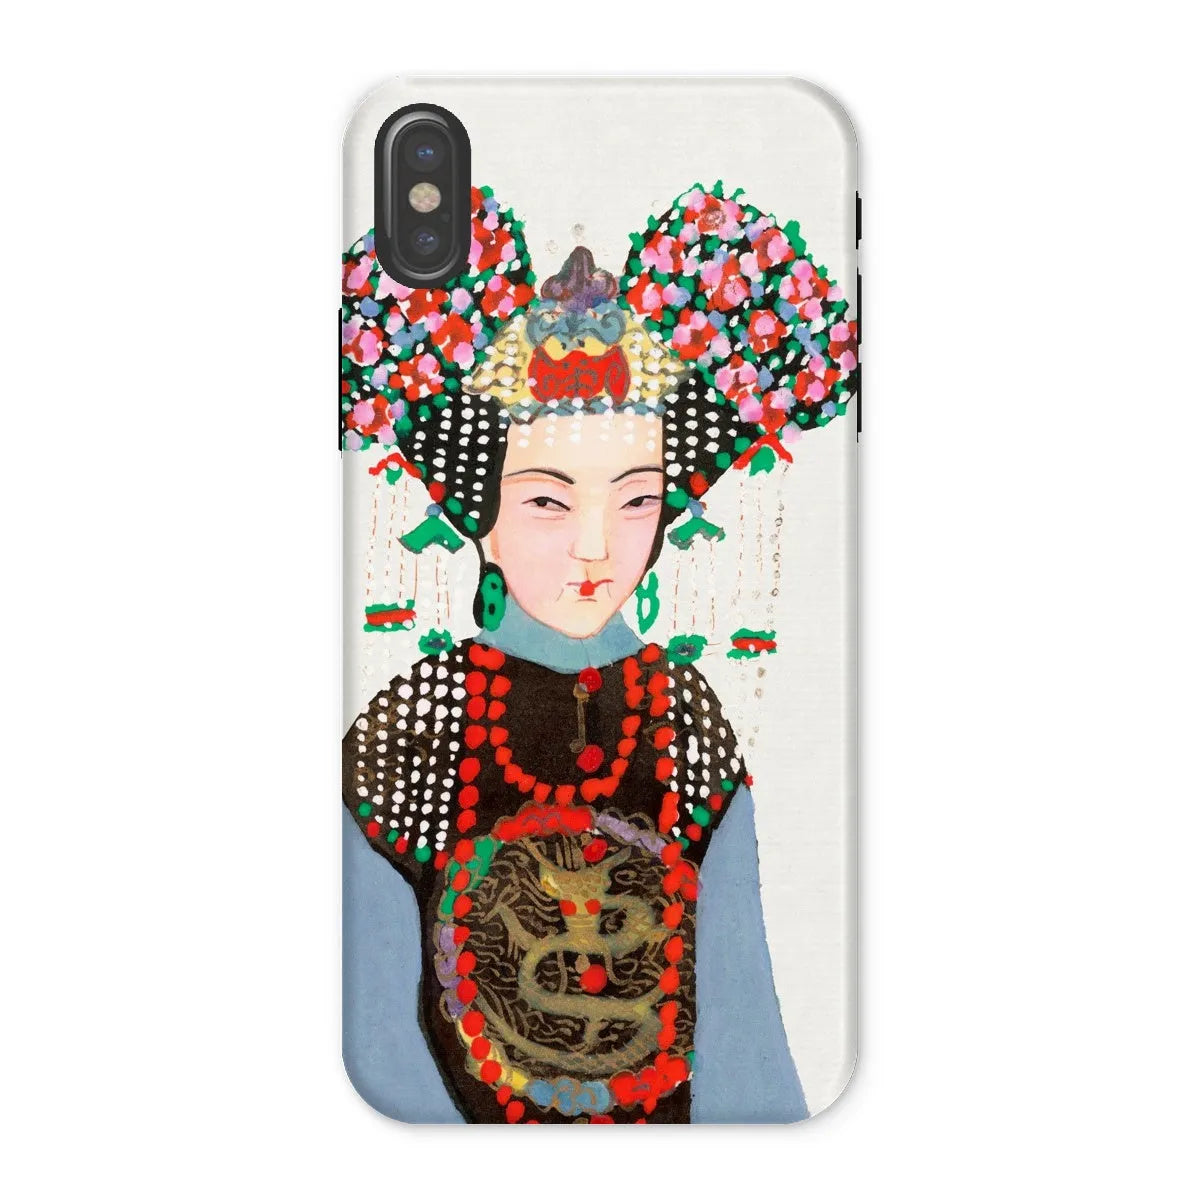 Chinese Empress - Manchu Art Phone Case - Iphone x / Matte - Mobile Phone Cases - Aesthetic Art